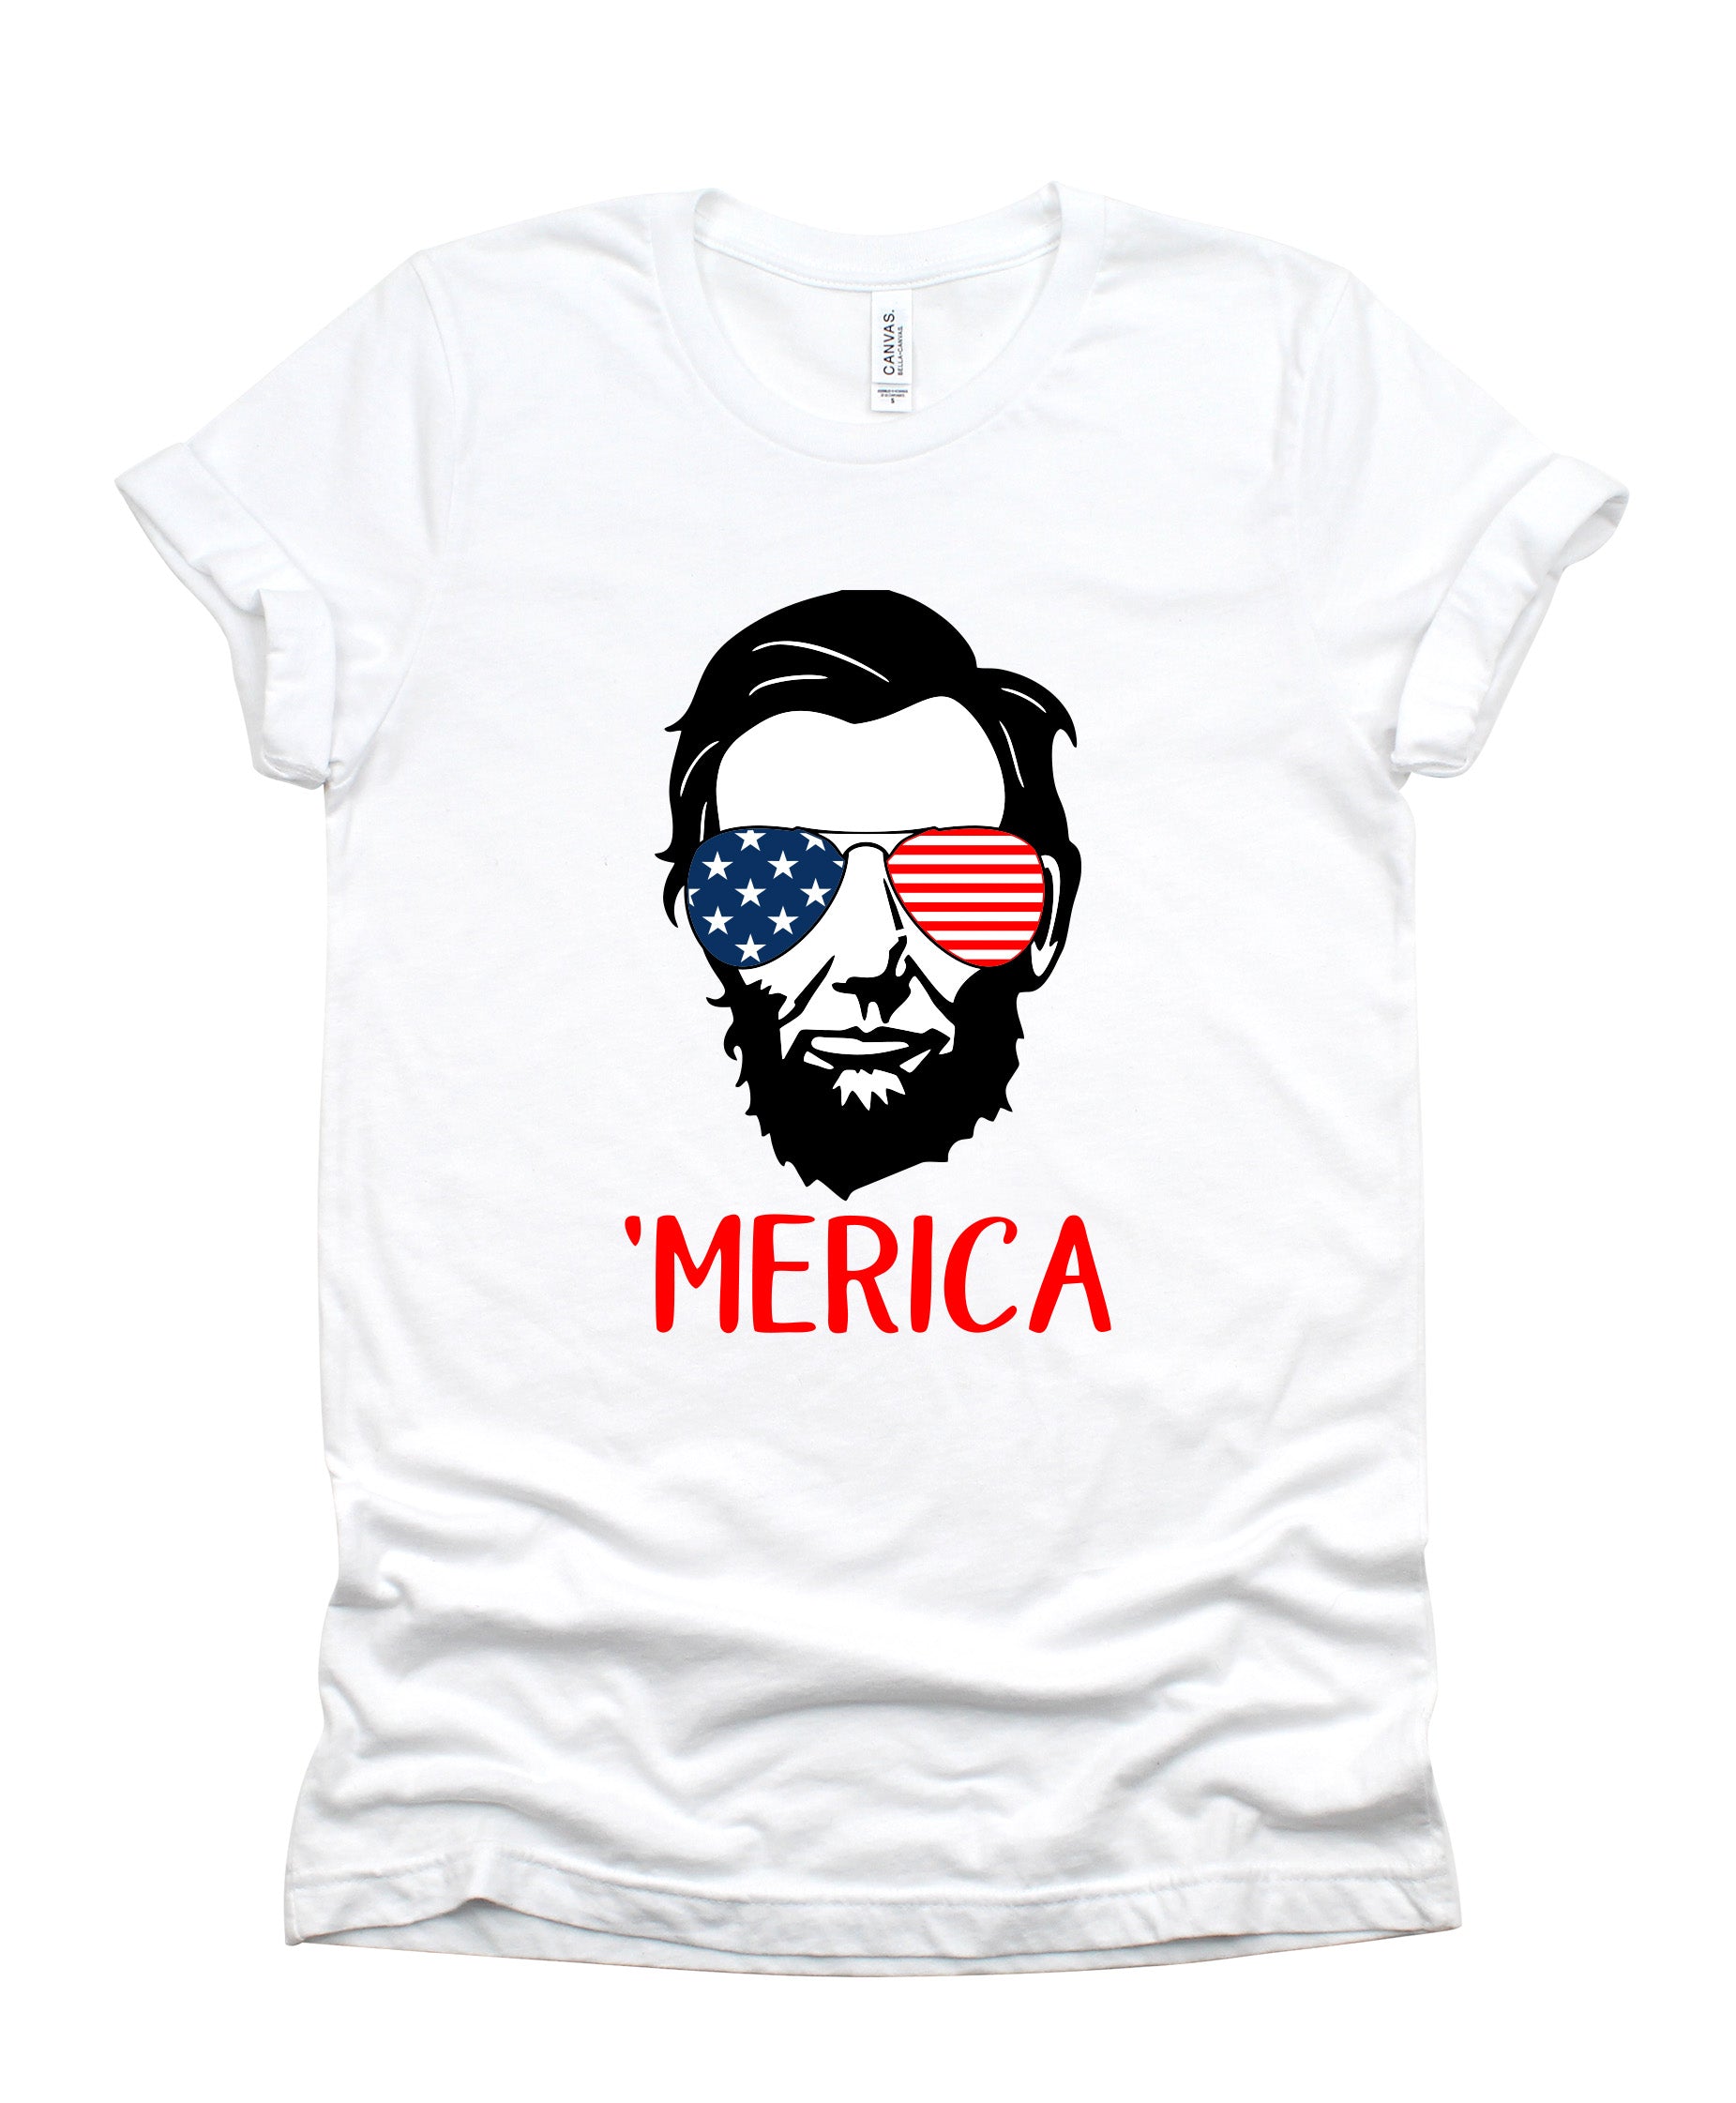 abe Lincoln 'merica party animal